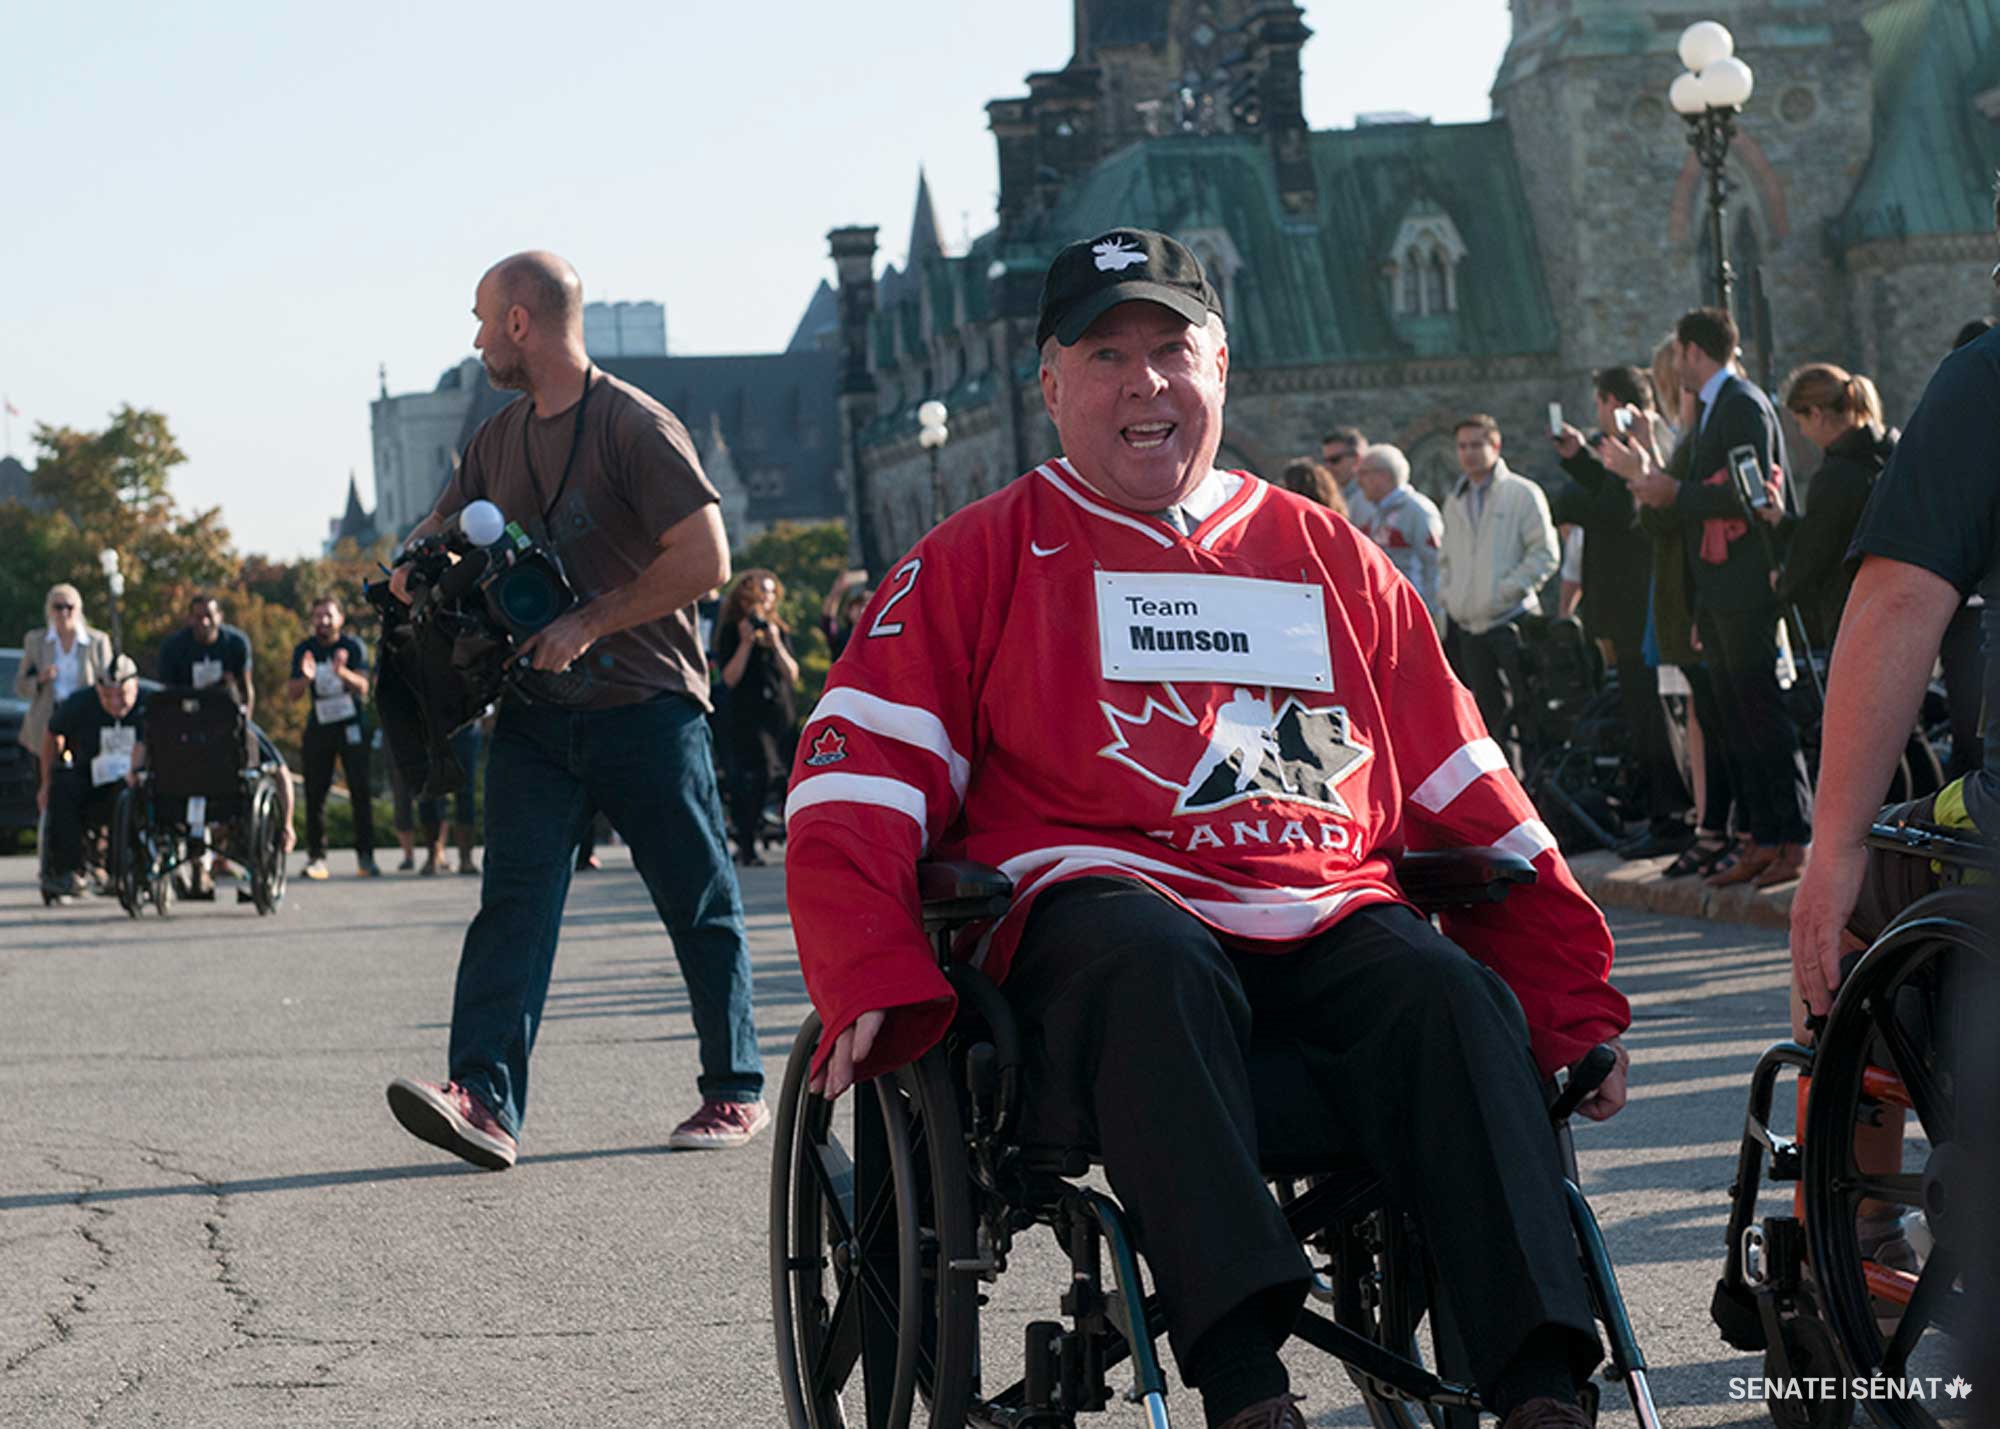 Senator Munson participates in the 6th annual Rolling Rampage race on Parliament Hill in 2017. The event celebrates the achievements of elite wheelchair athletes and brings awareness to the challenges overcome by persons with disabilities.